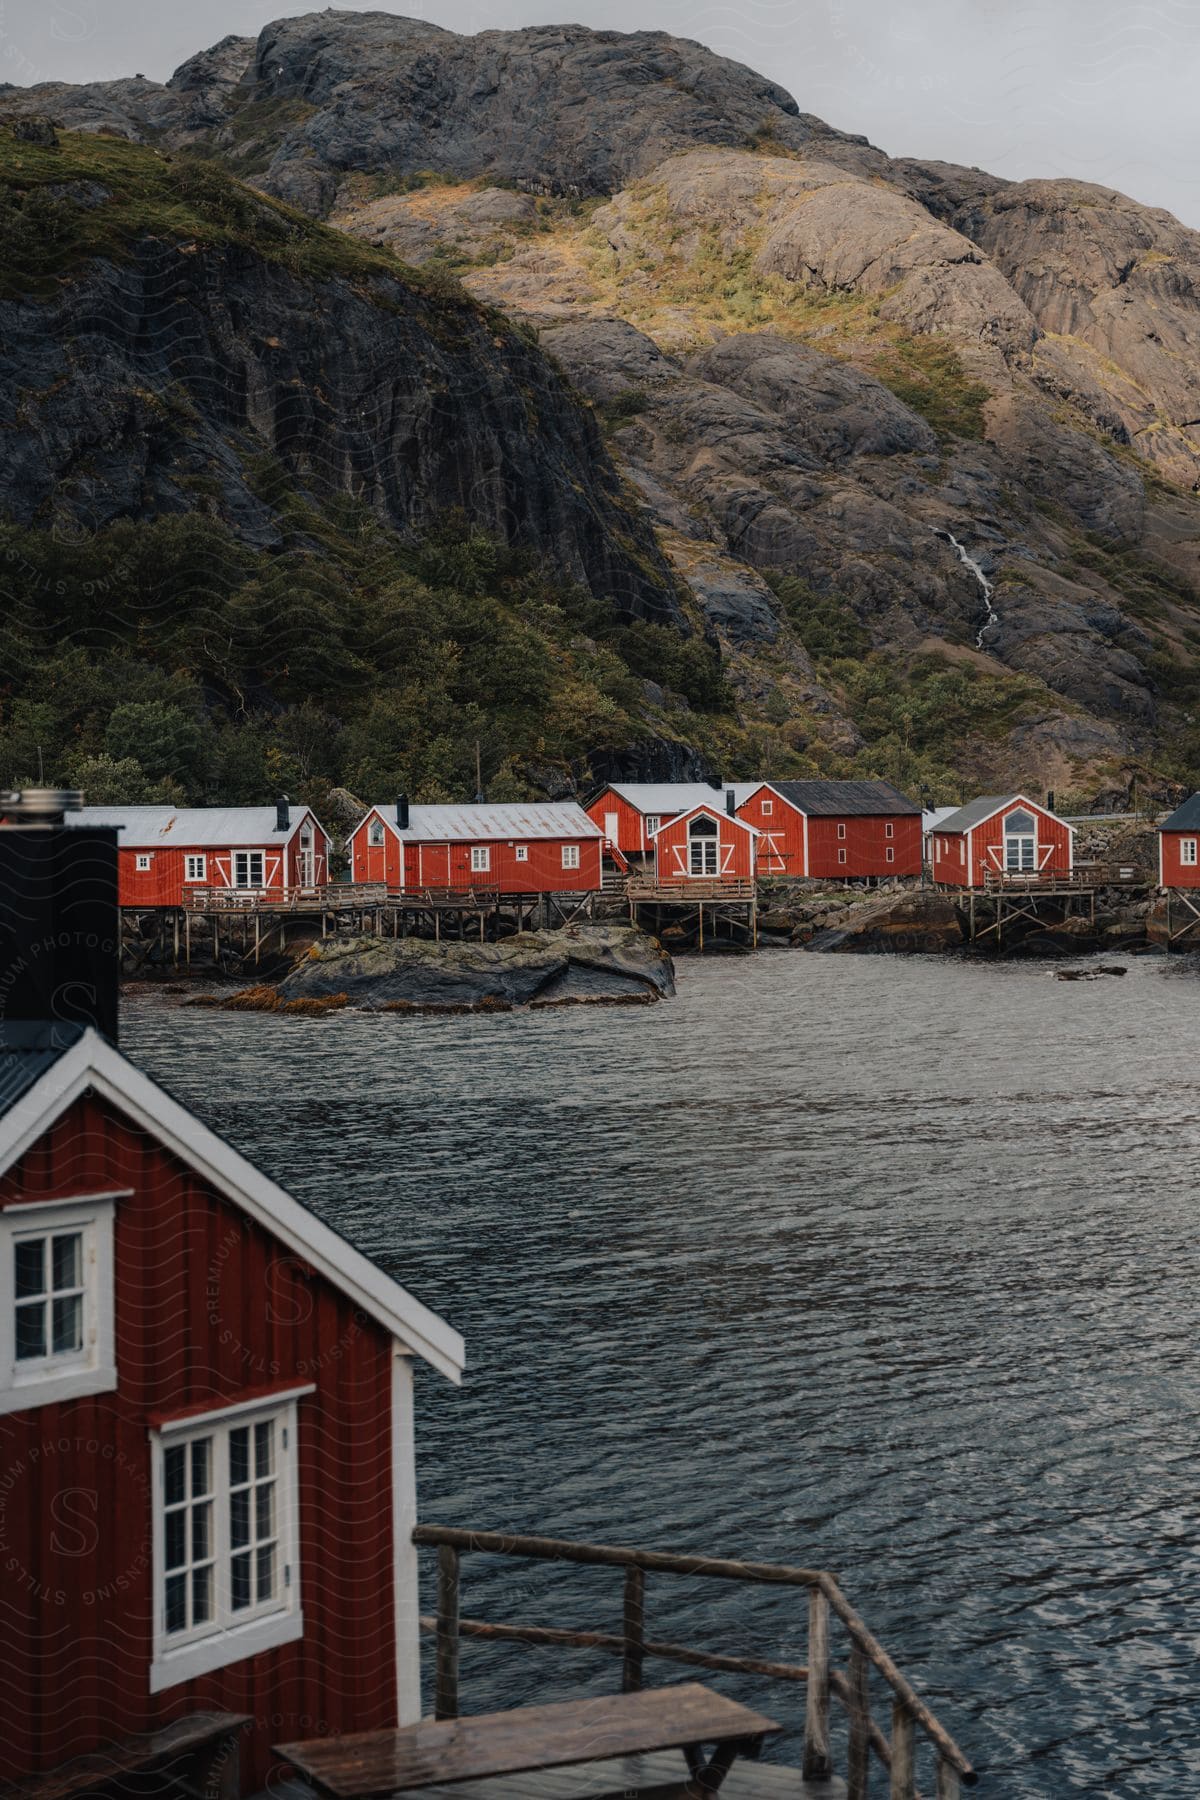 a small town close to shore with houses painted red next to a rock mountain